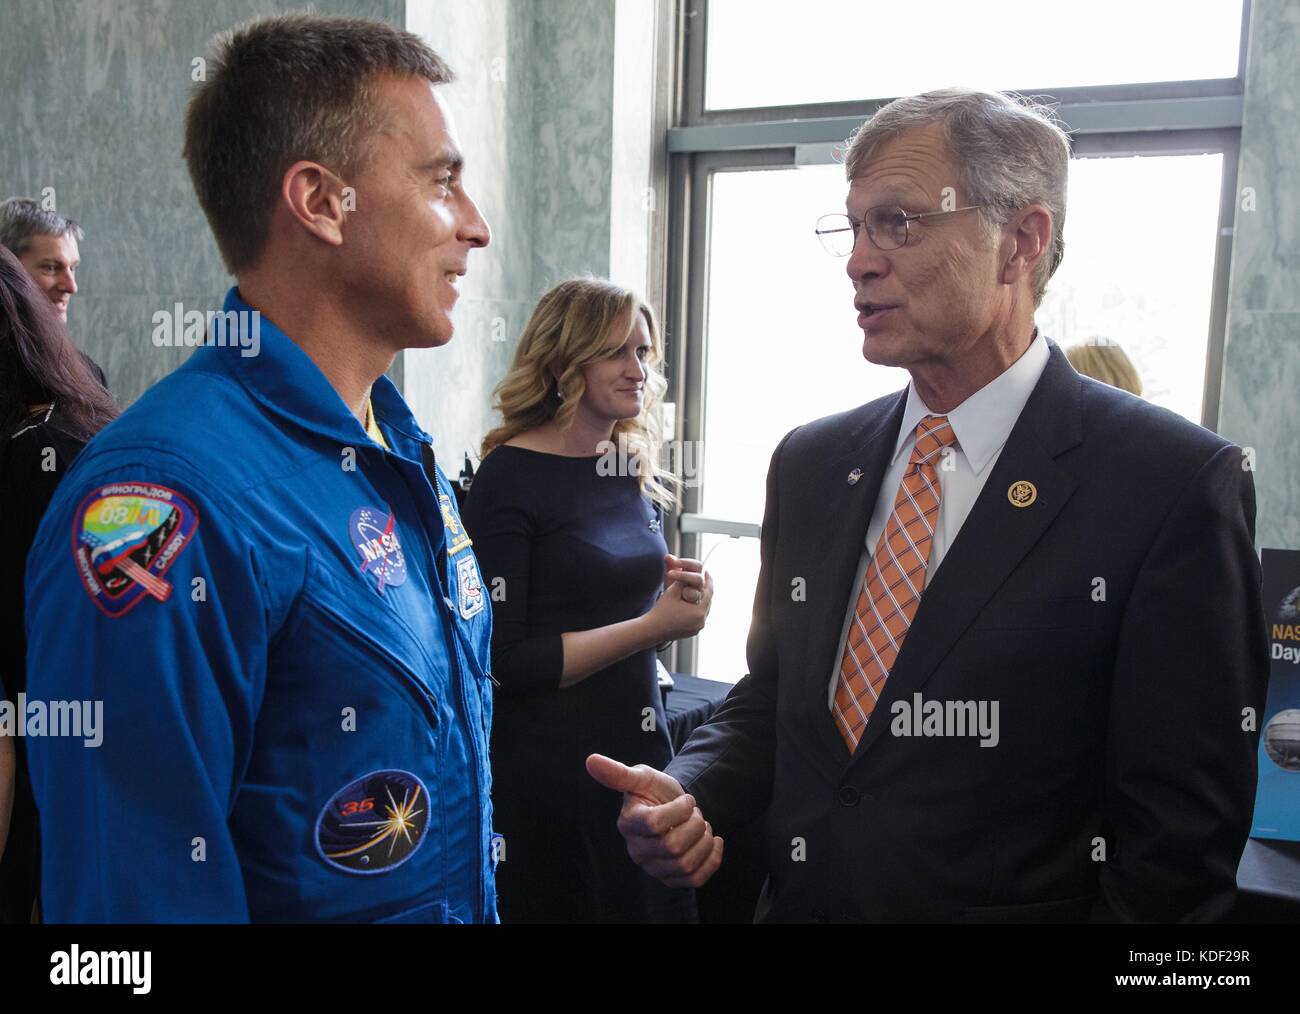 NASA astronaut Chris Cassidy (left) speaks with U.S. Texas Representative Brian Babin during NASA Tech Day on the Hill at the Rayburn House Office Building June 15, 2017 in Washington, DC.   (photo by Joel Kowsky  via Planetpix) Stock Photo